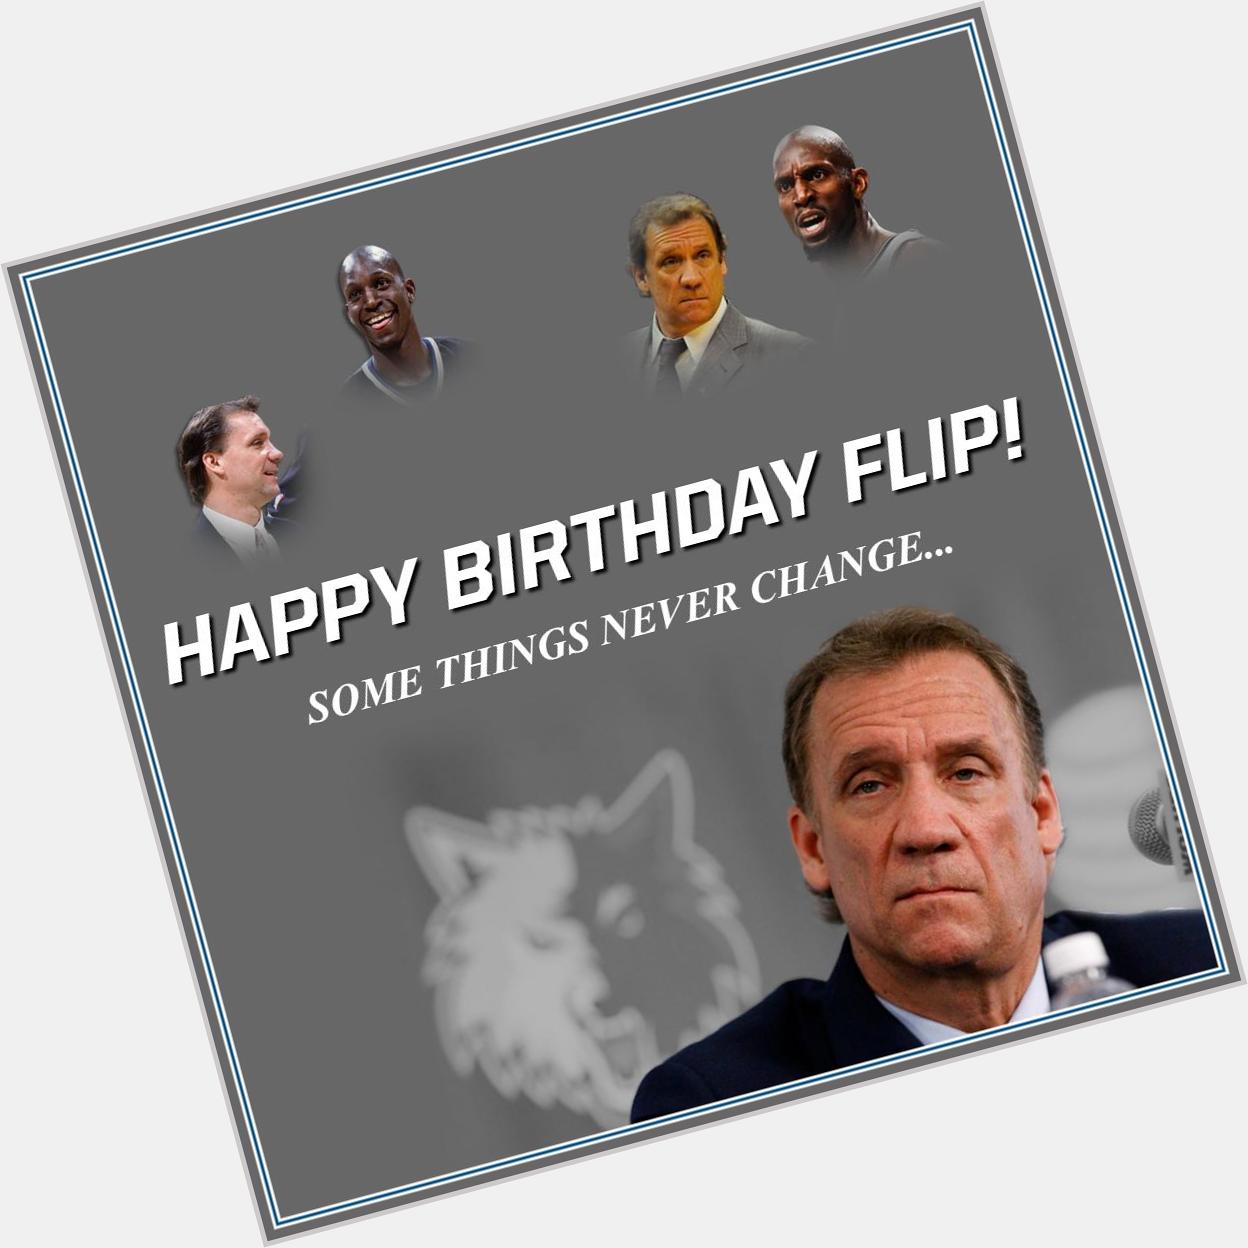 They say 60 is the new 40. Looks like 60 is the old 40 for HC Happy Birthday Flip! 